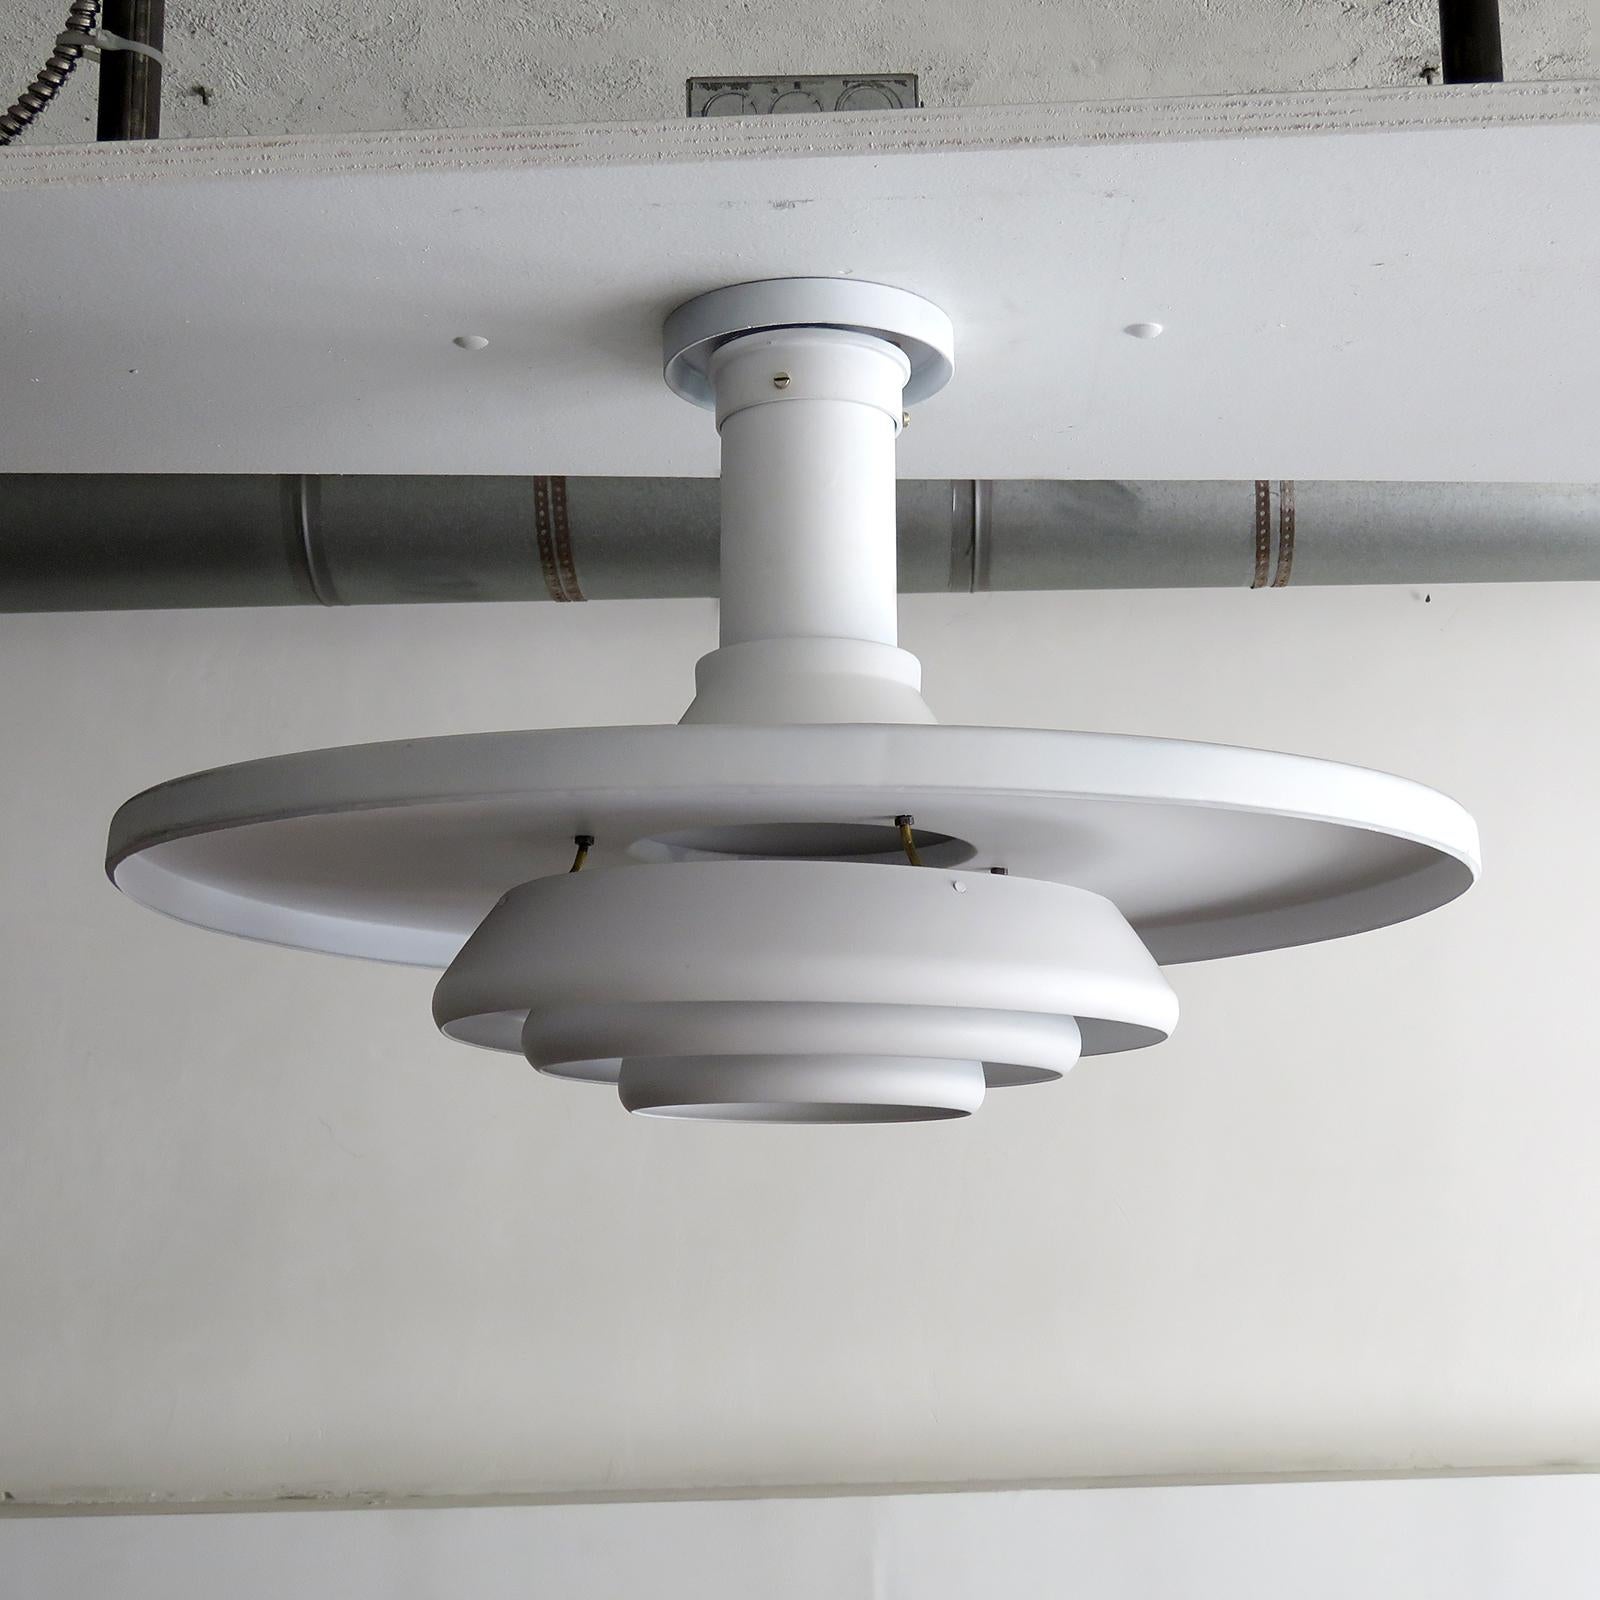 Wonderful 'Flying Saucer' Model A337, ceiling flush mount lamp by Alvar Aalto, early example by original manufacture Valaisinpaja Oy, Finland, circa 1953, labelled with manufacture's mark, wired for US standards, one E27 socket, max. wattage 100w,